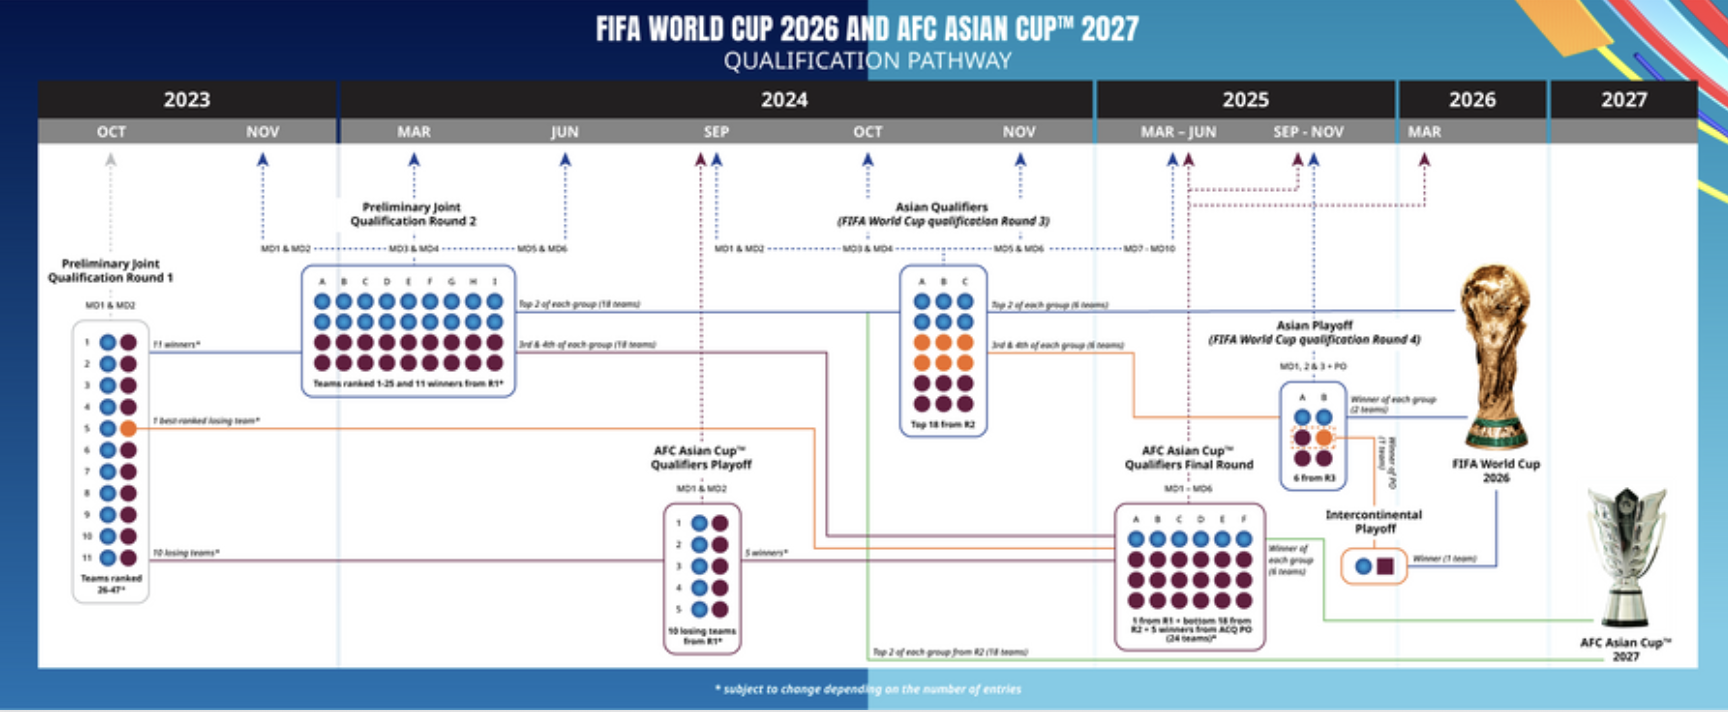 AsianCup2023 on X: 𝐓𝐡𝐞 𝐑𝐨𝐚𝐝 𝐓𝐨 #AsianCup2027 𝐚𝐧𝐝 #FIFAWorldCup  𝐂𝐨𝐧𝐭𝐢𝐧𝐮𝐞𝐬! 9️⃣ group winners and 9️⃣ runners up will automatically  qualify for 2027 🇸🇦Saudi Arabia and continue their passage into the  #AsianQualifiers Final